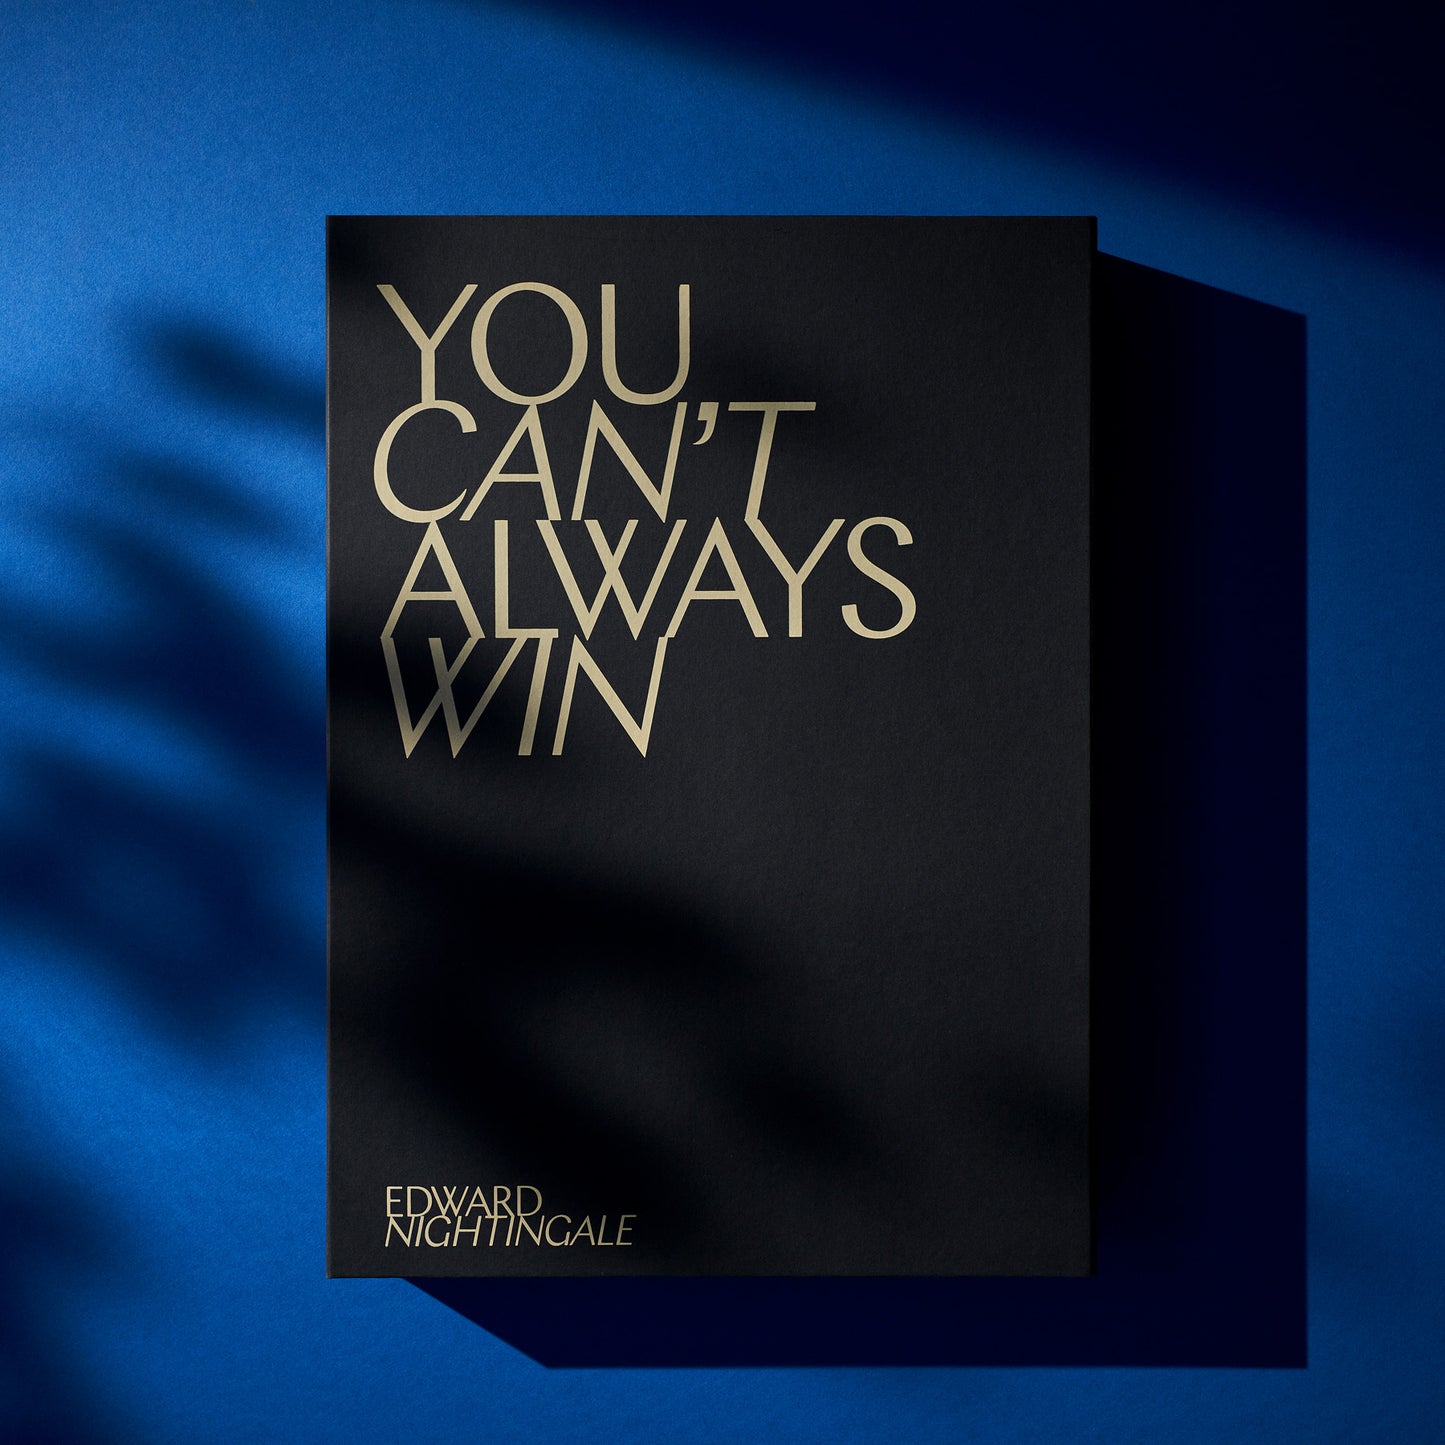 Special edition of "You can’t always win" by Edward Nightingale